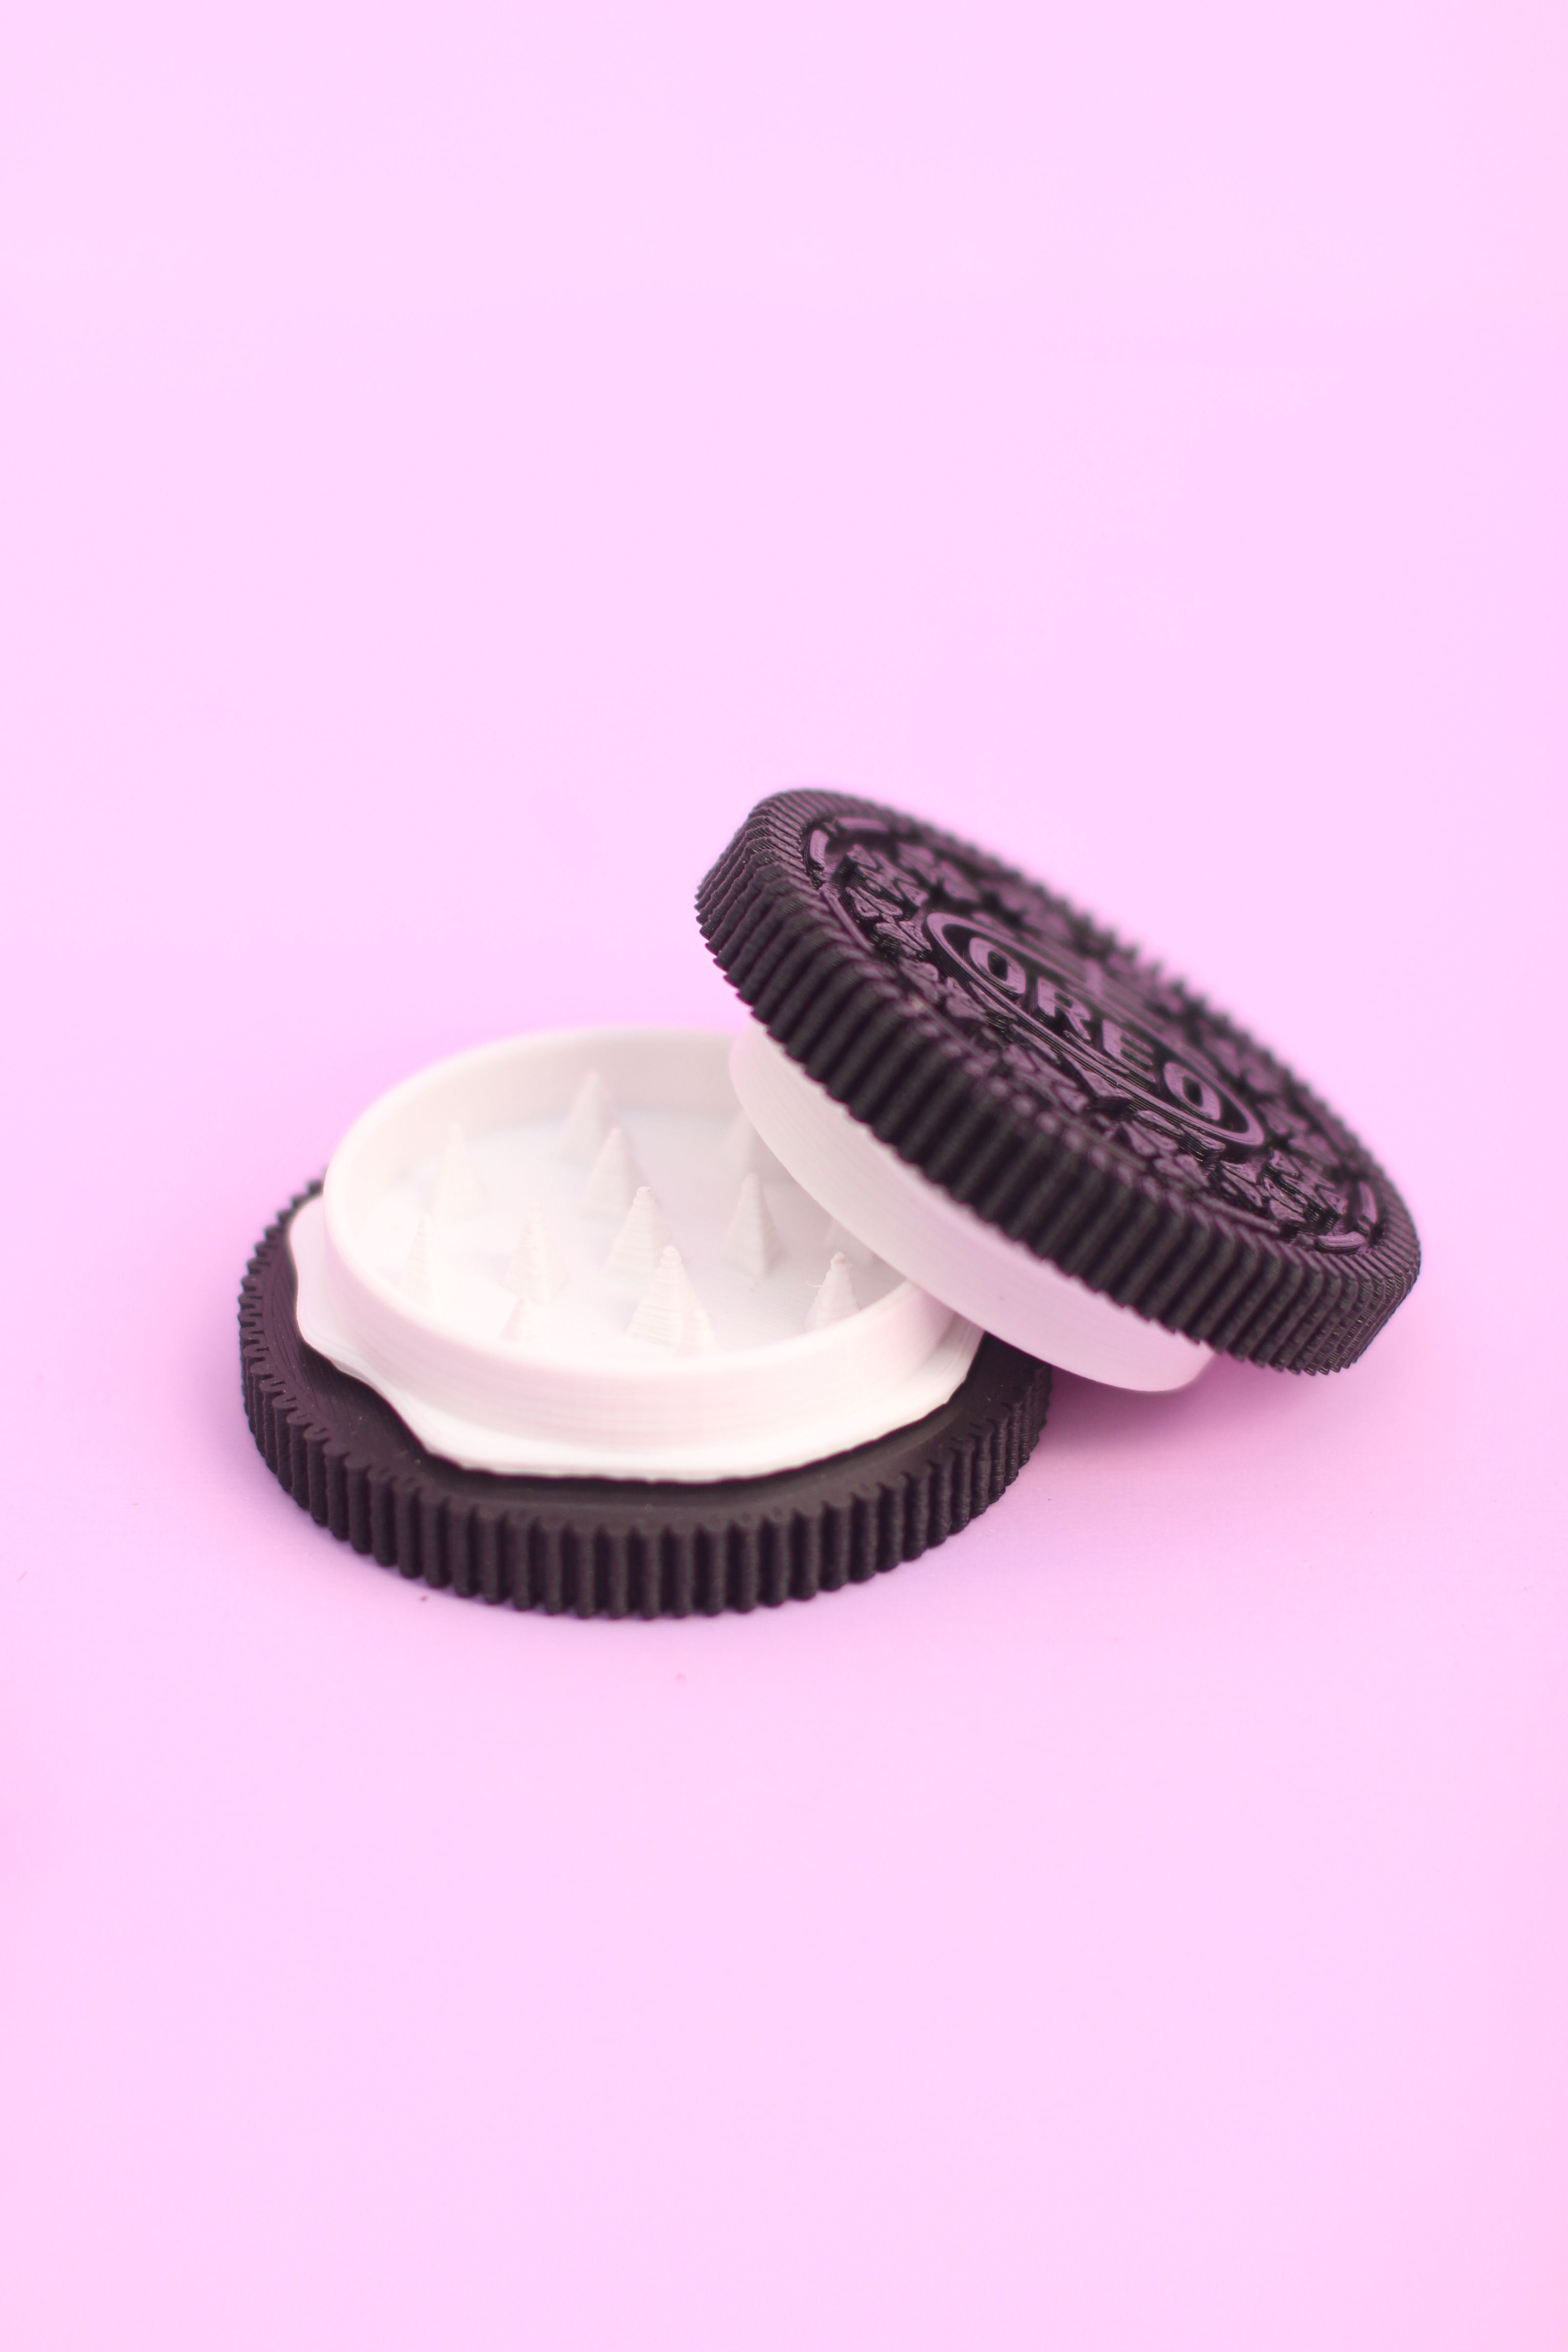 A cookie is sitting on top of another - Oreo